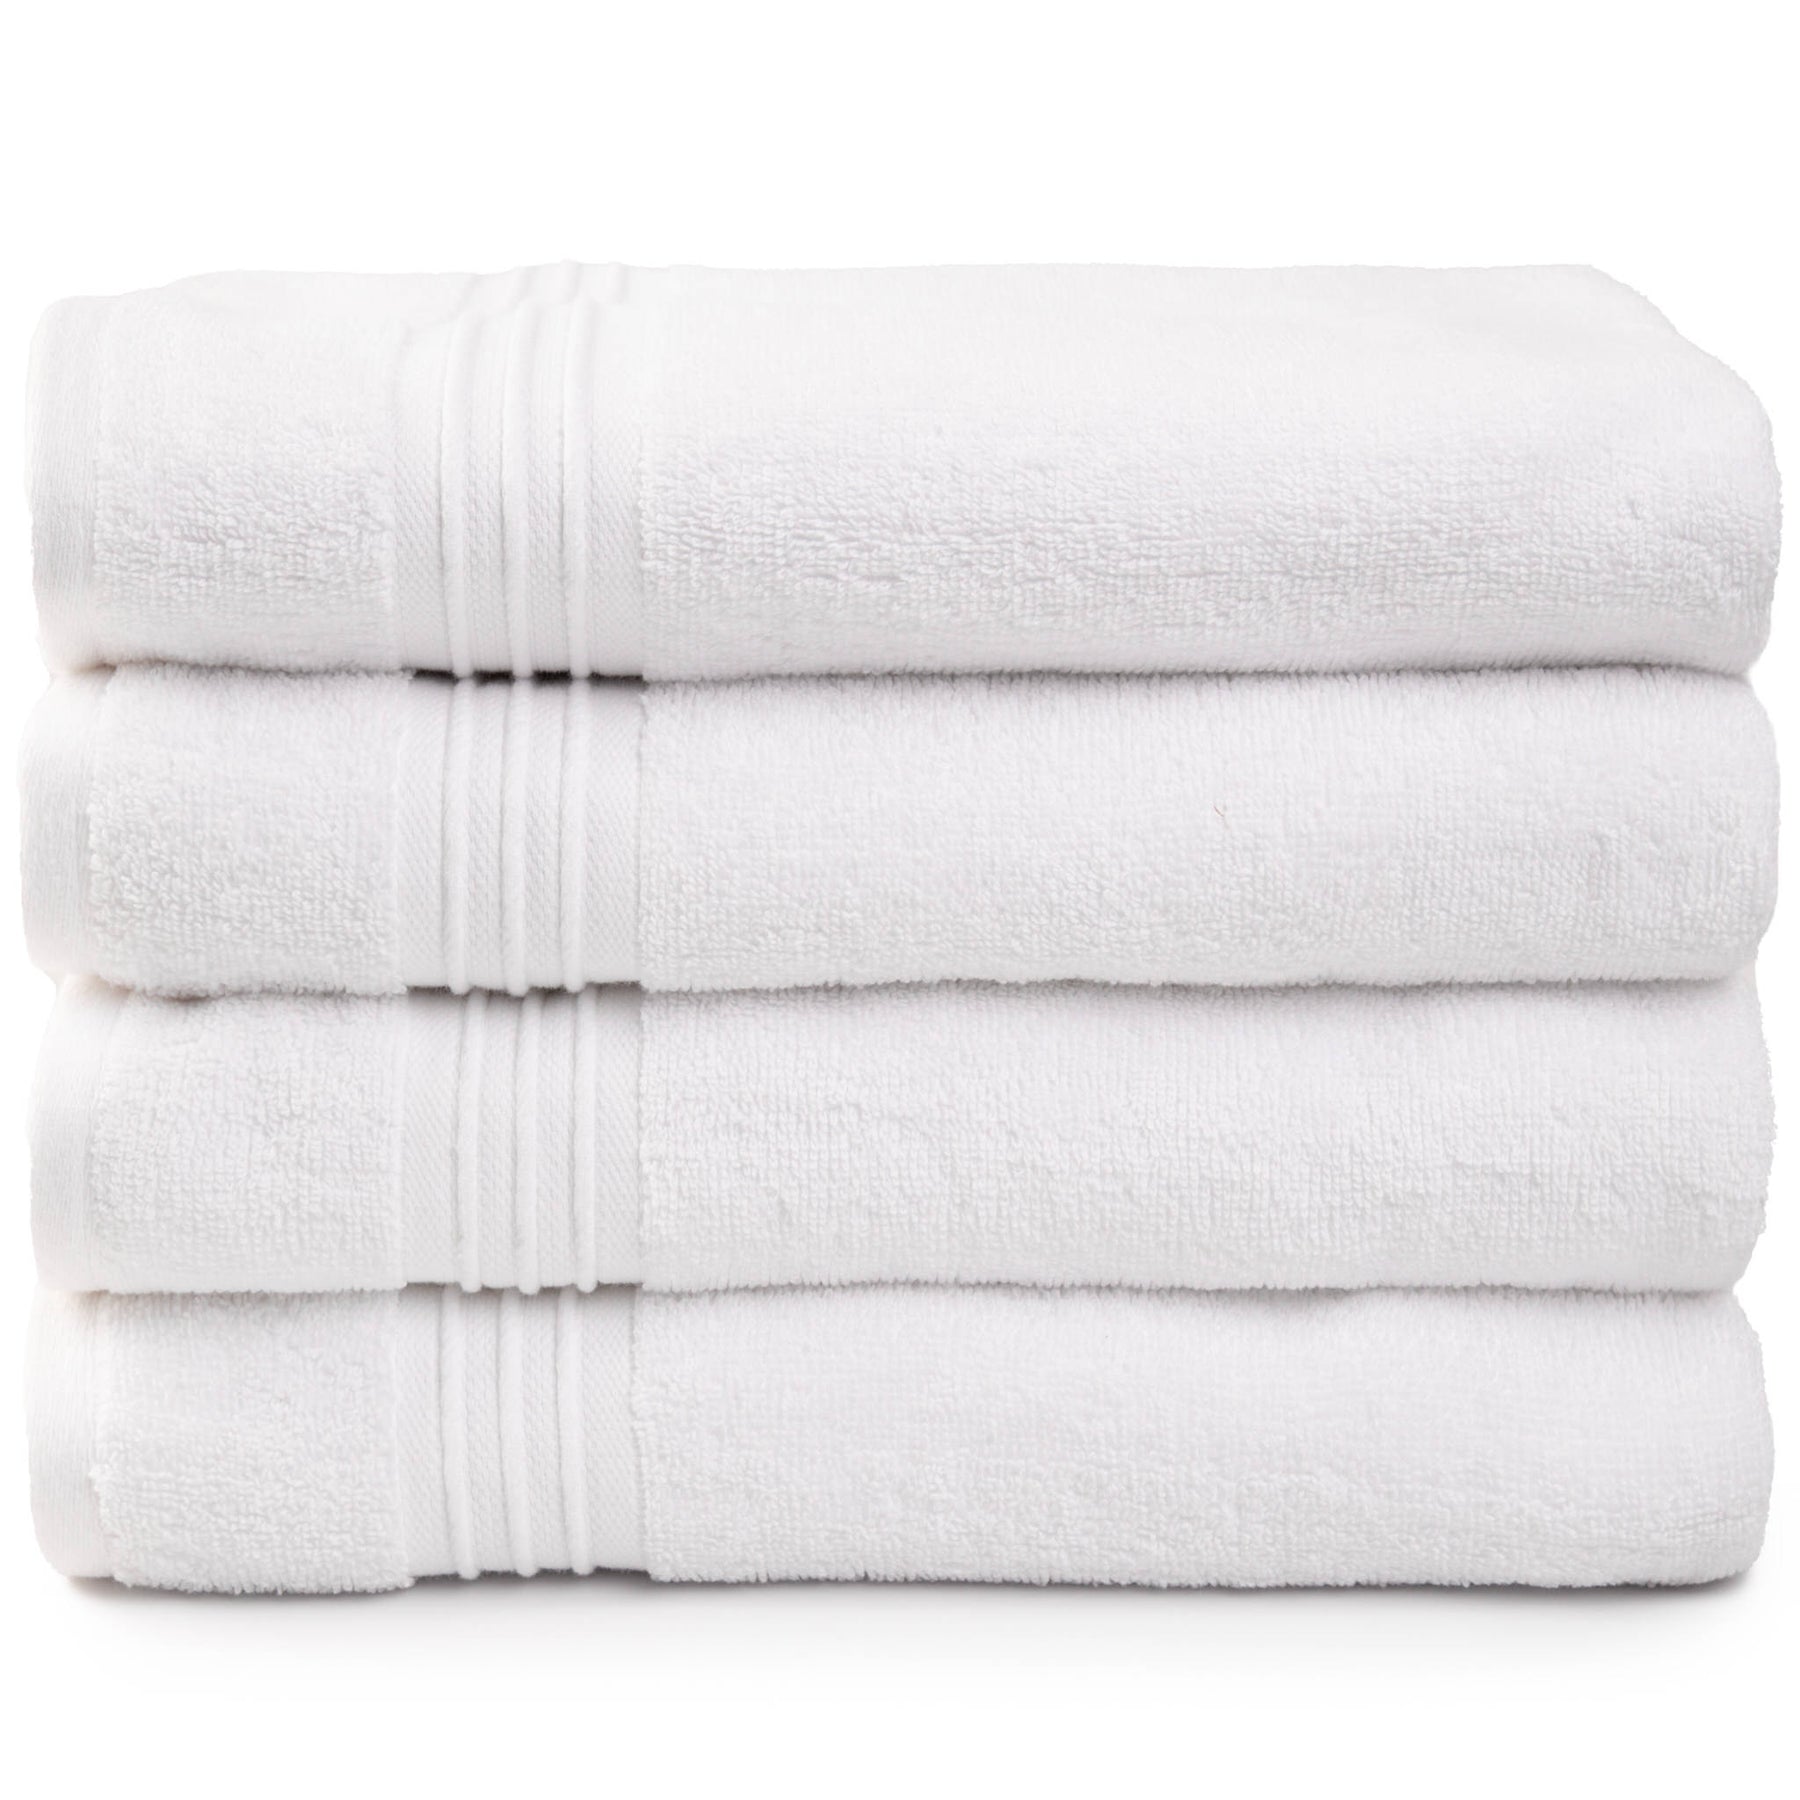 Sticky Toffee Terry Cotton Bath Towel Set for Bathroom, 4 Pack, Soft and Absorbent, 480 gsm, 30 in x 54 in, Gray, Size: 4 Piece Bath Towels